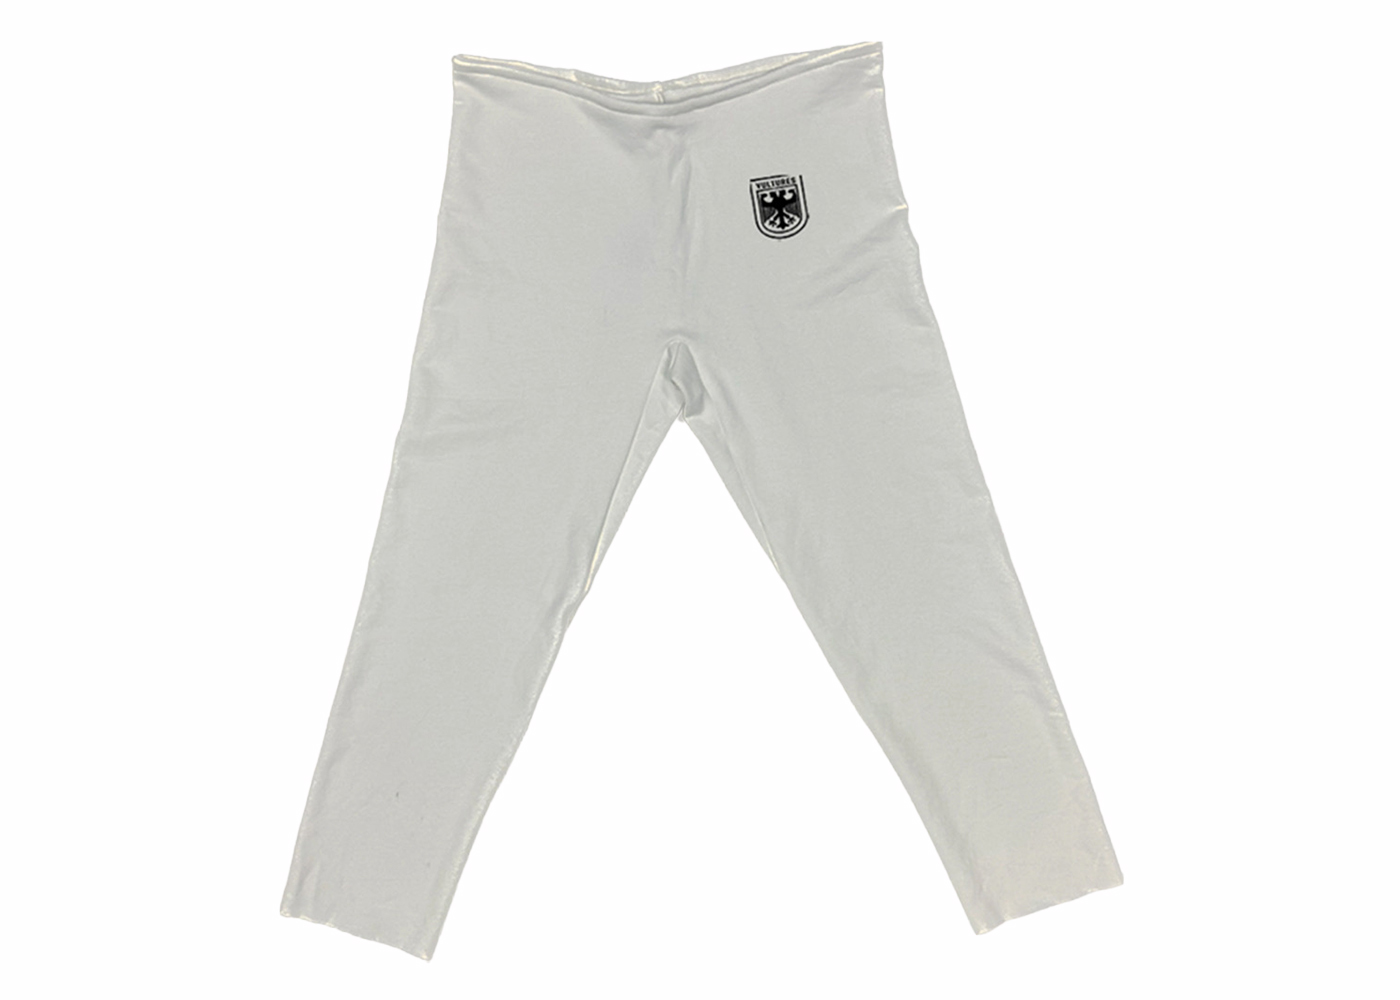 YZY Vultures Pants White